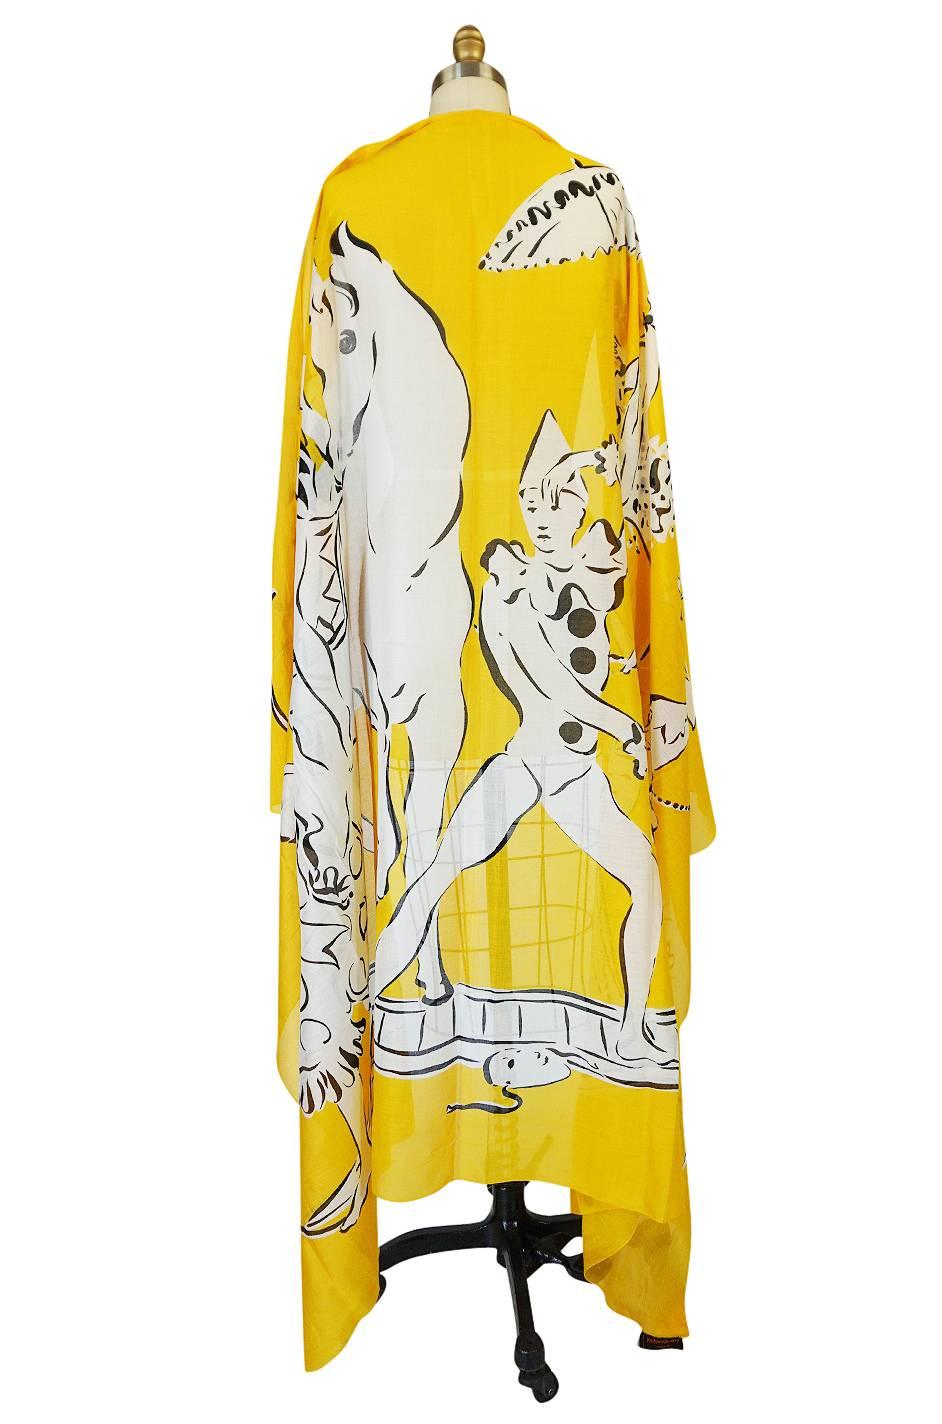 

Gorgeous and absolutely huge, this Yves Saint Laurent scarf is a mix of a yellow backdrop with a white and black circus design that is insanely beautiful and detailed. The fabric is 100% cotton voile and light and airy with just a touch of